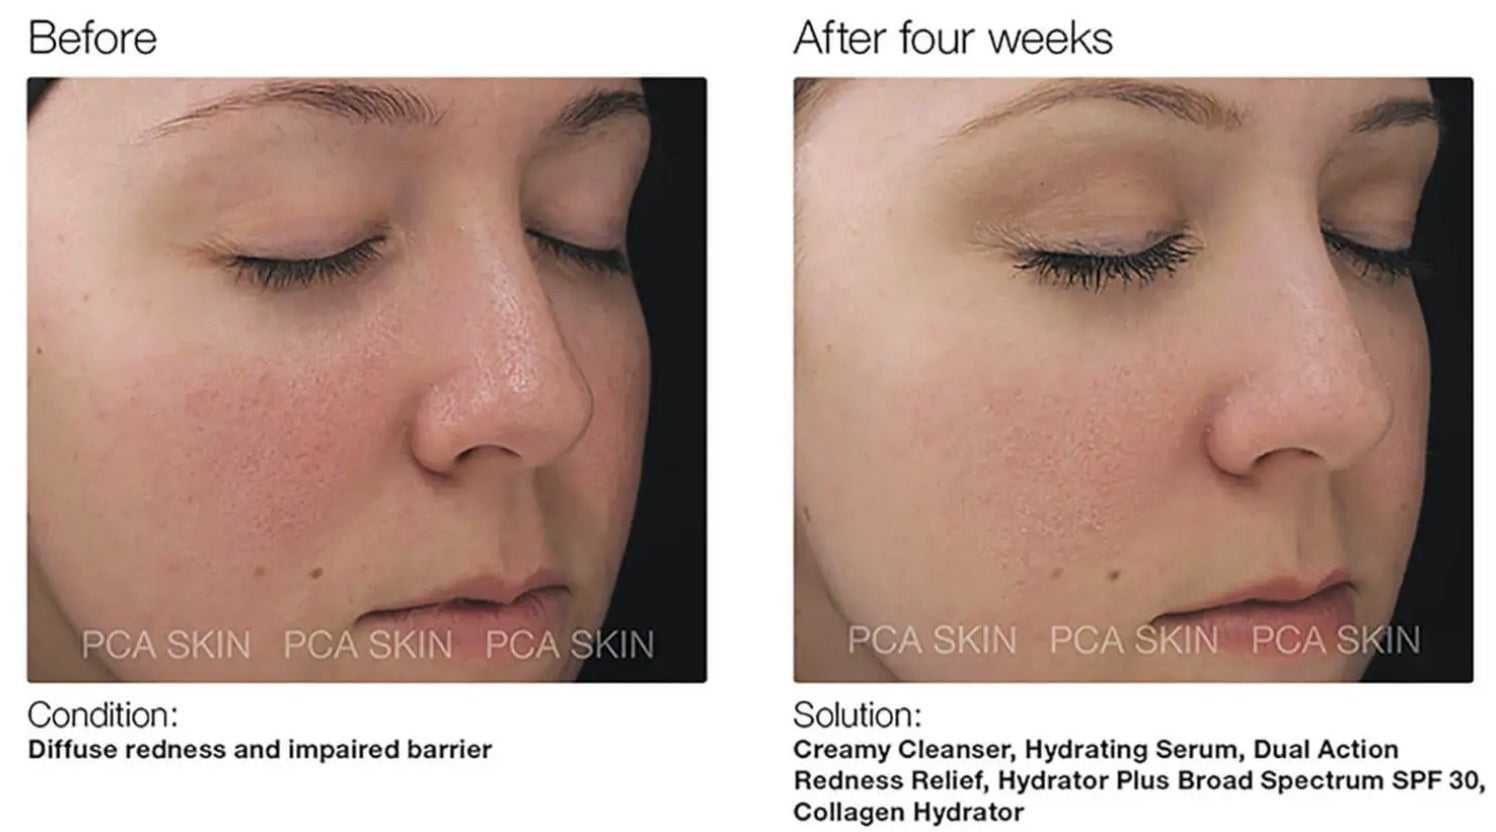 a person with red skin before, and even skin after using this serum for four weeks